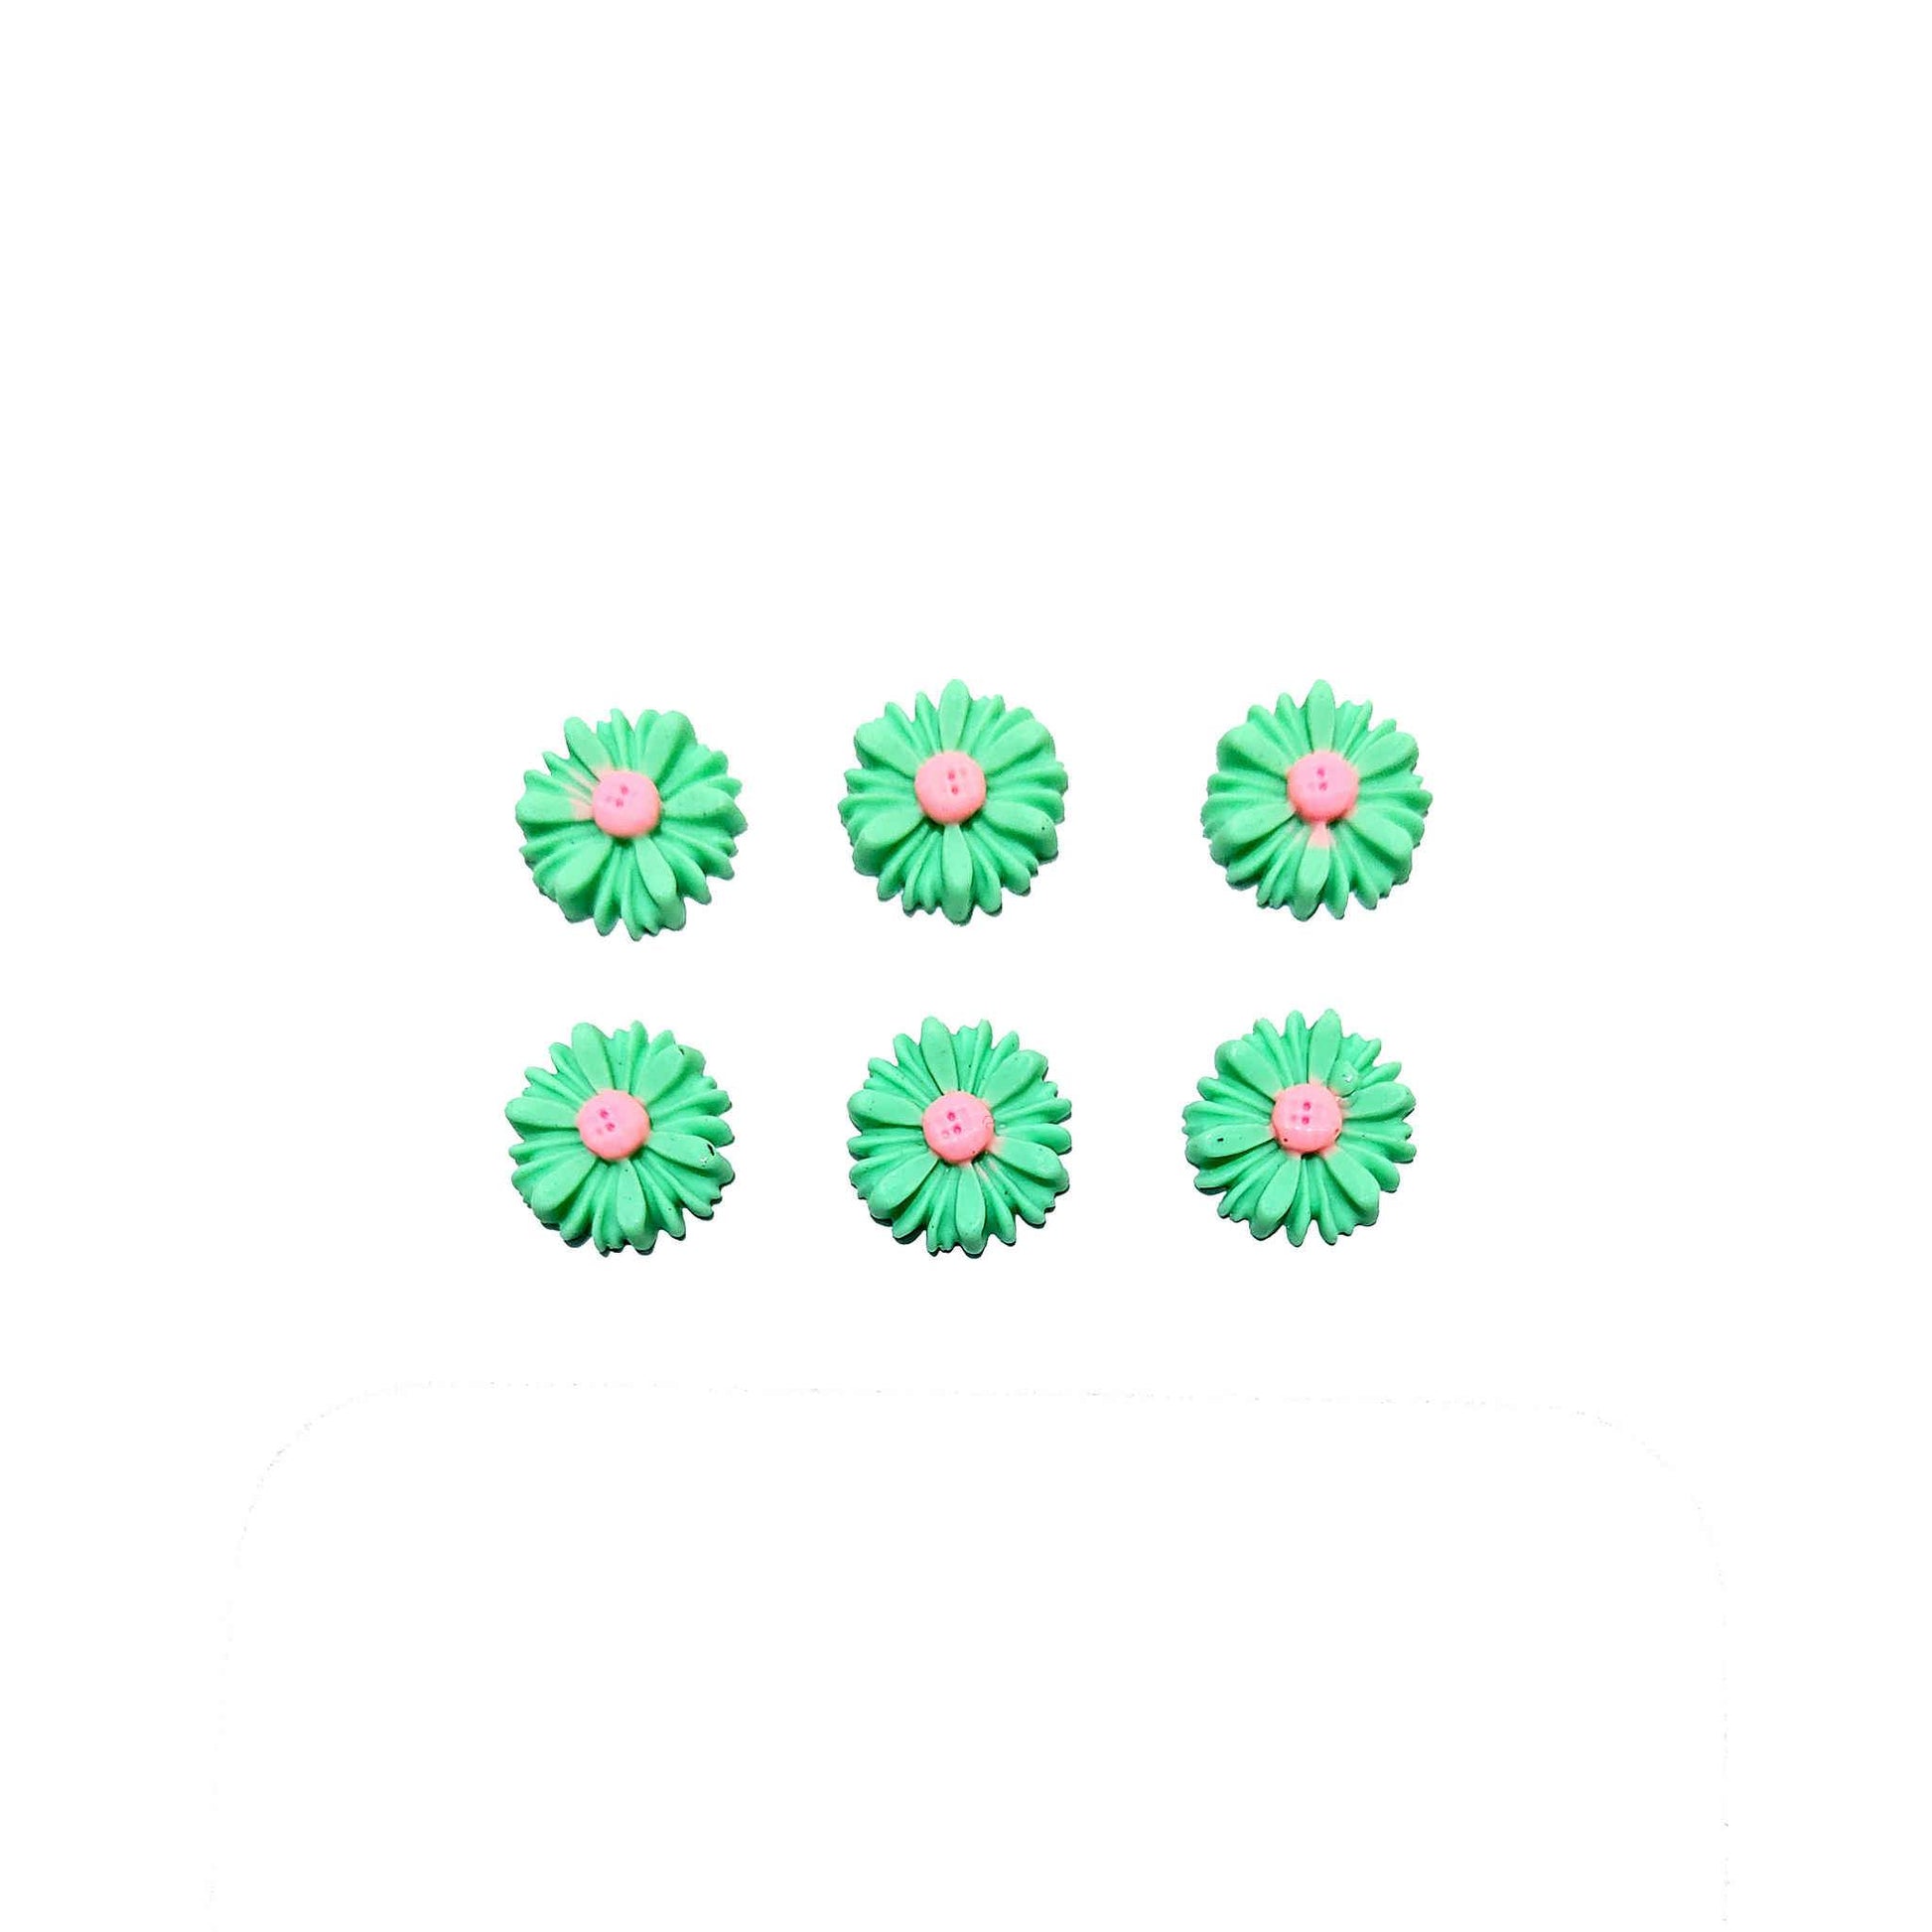 Indian Petals Beautiful Flat Base Floral Cabochons for Craft Trousseau Packing or Decoration - Design 419, Light Green